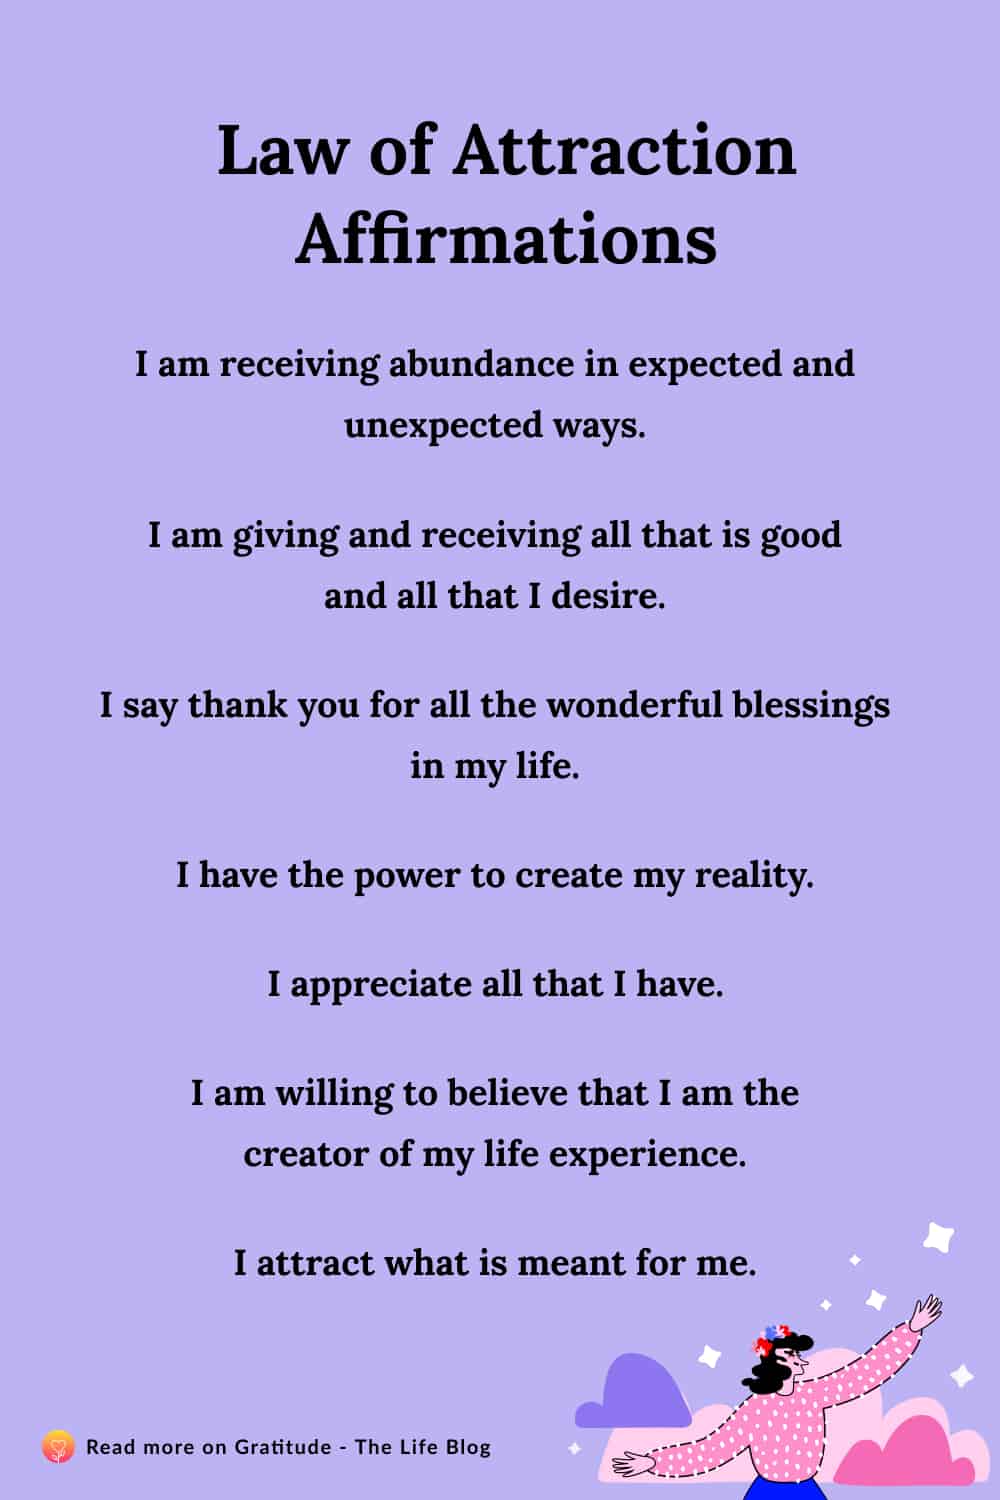 Image with list of law of attraction affirmations